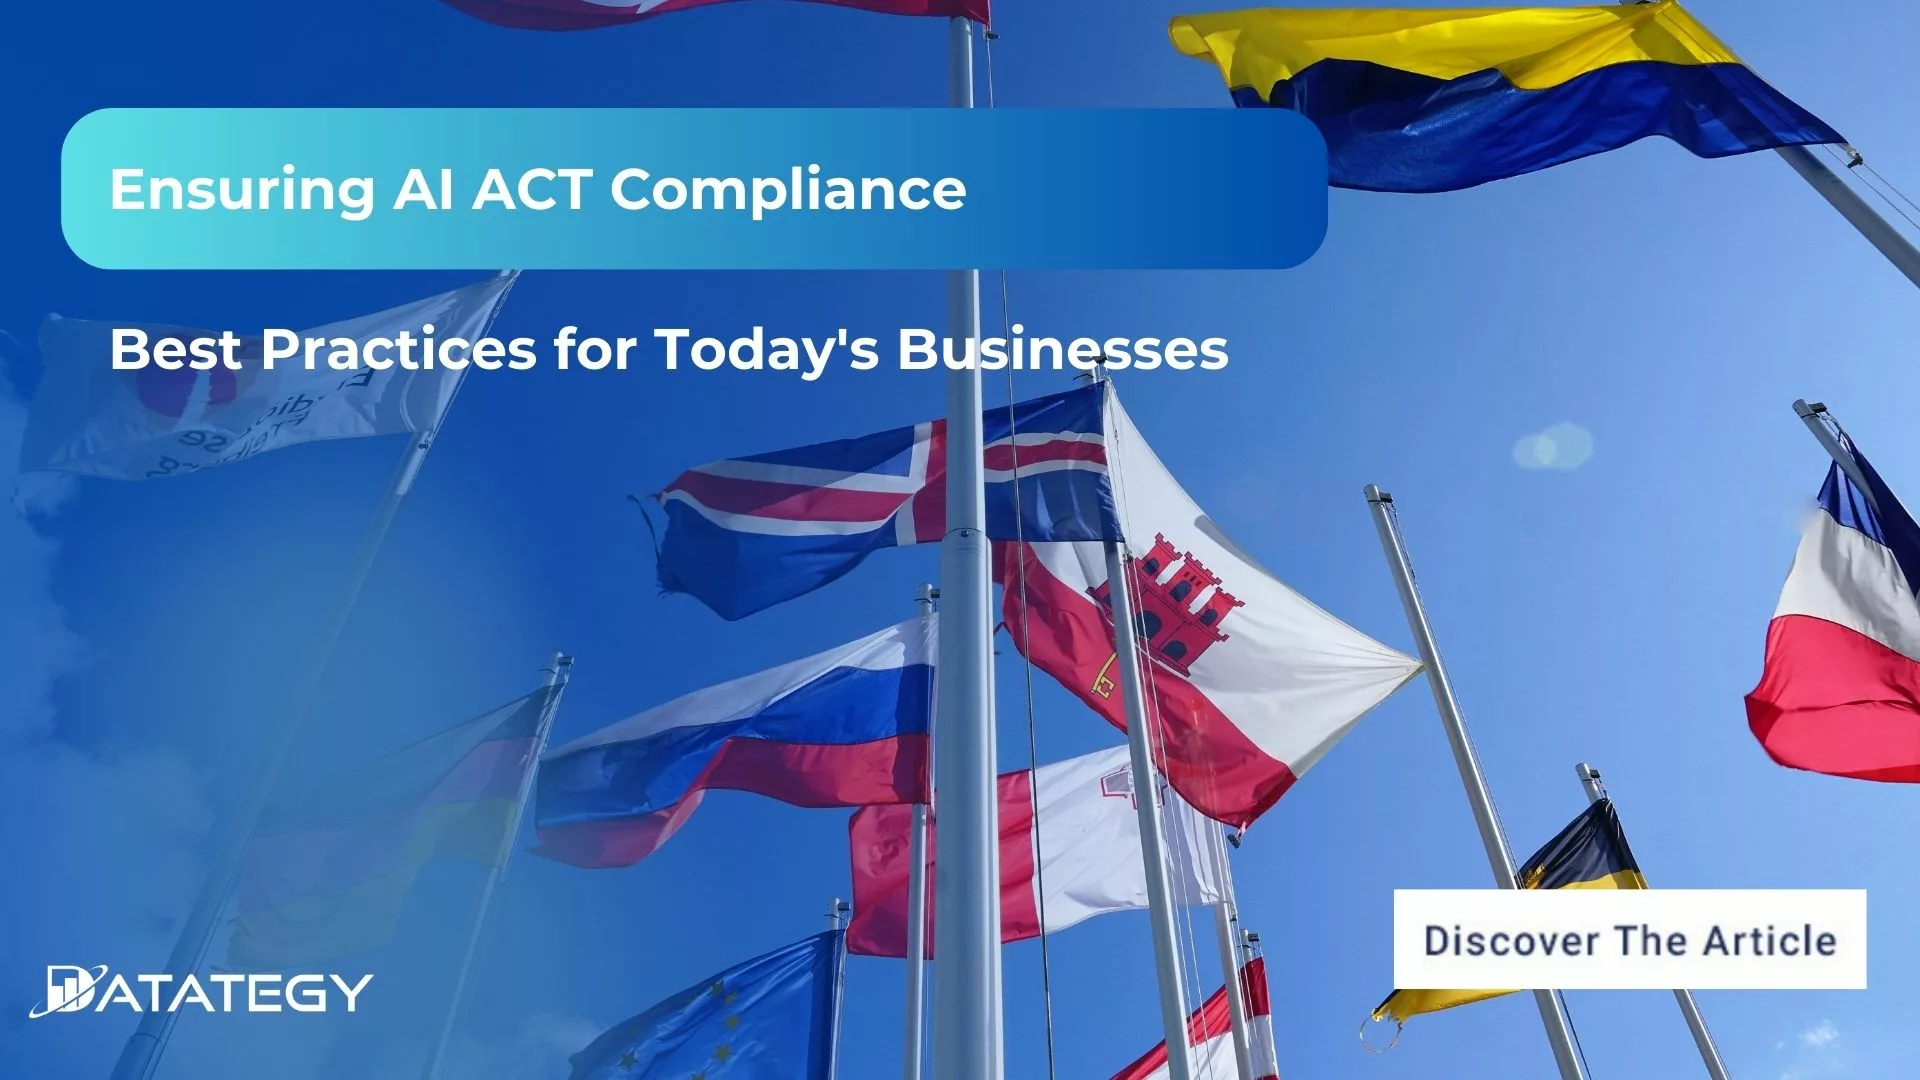 Ensuring AI ACT Compliance: Best Practices for Today’s Businesses